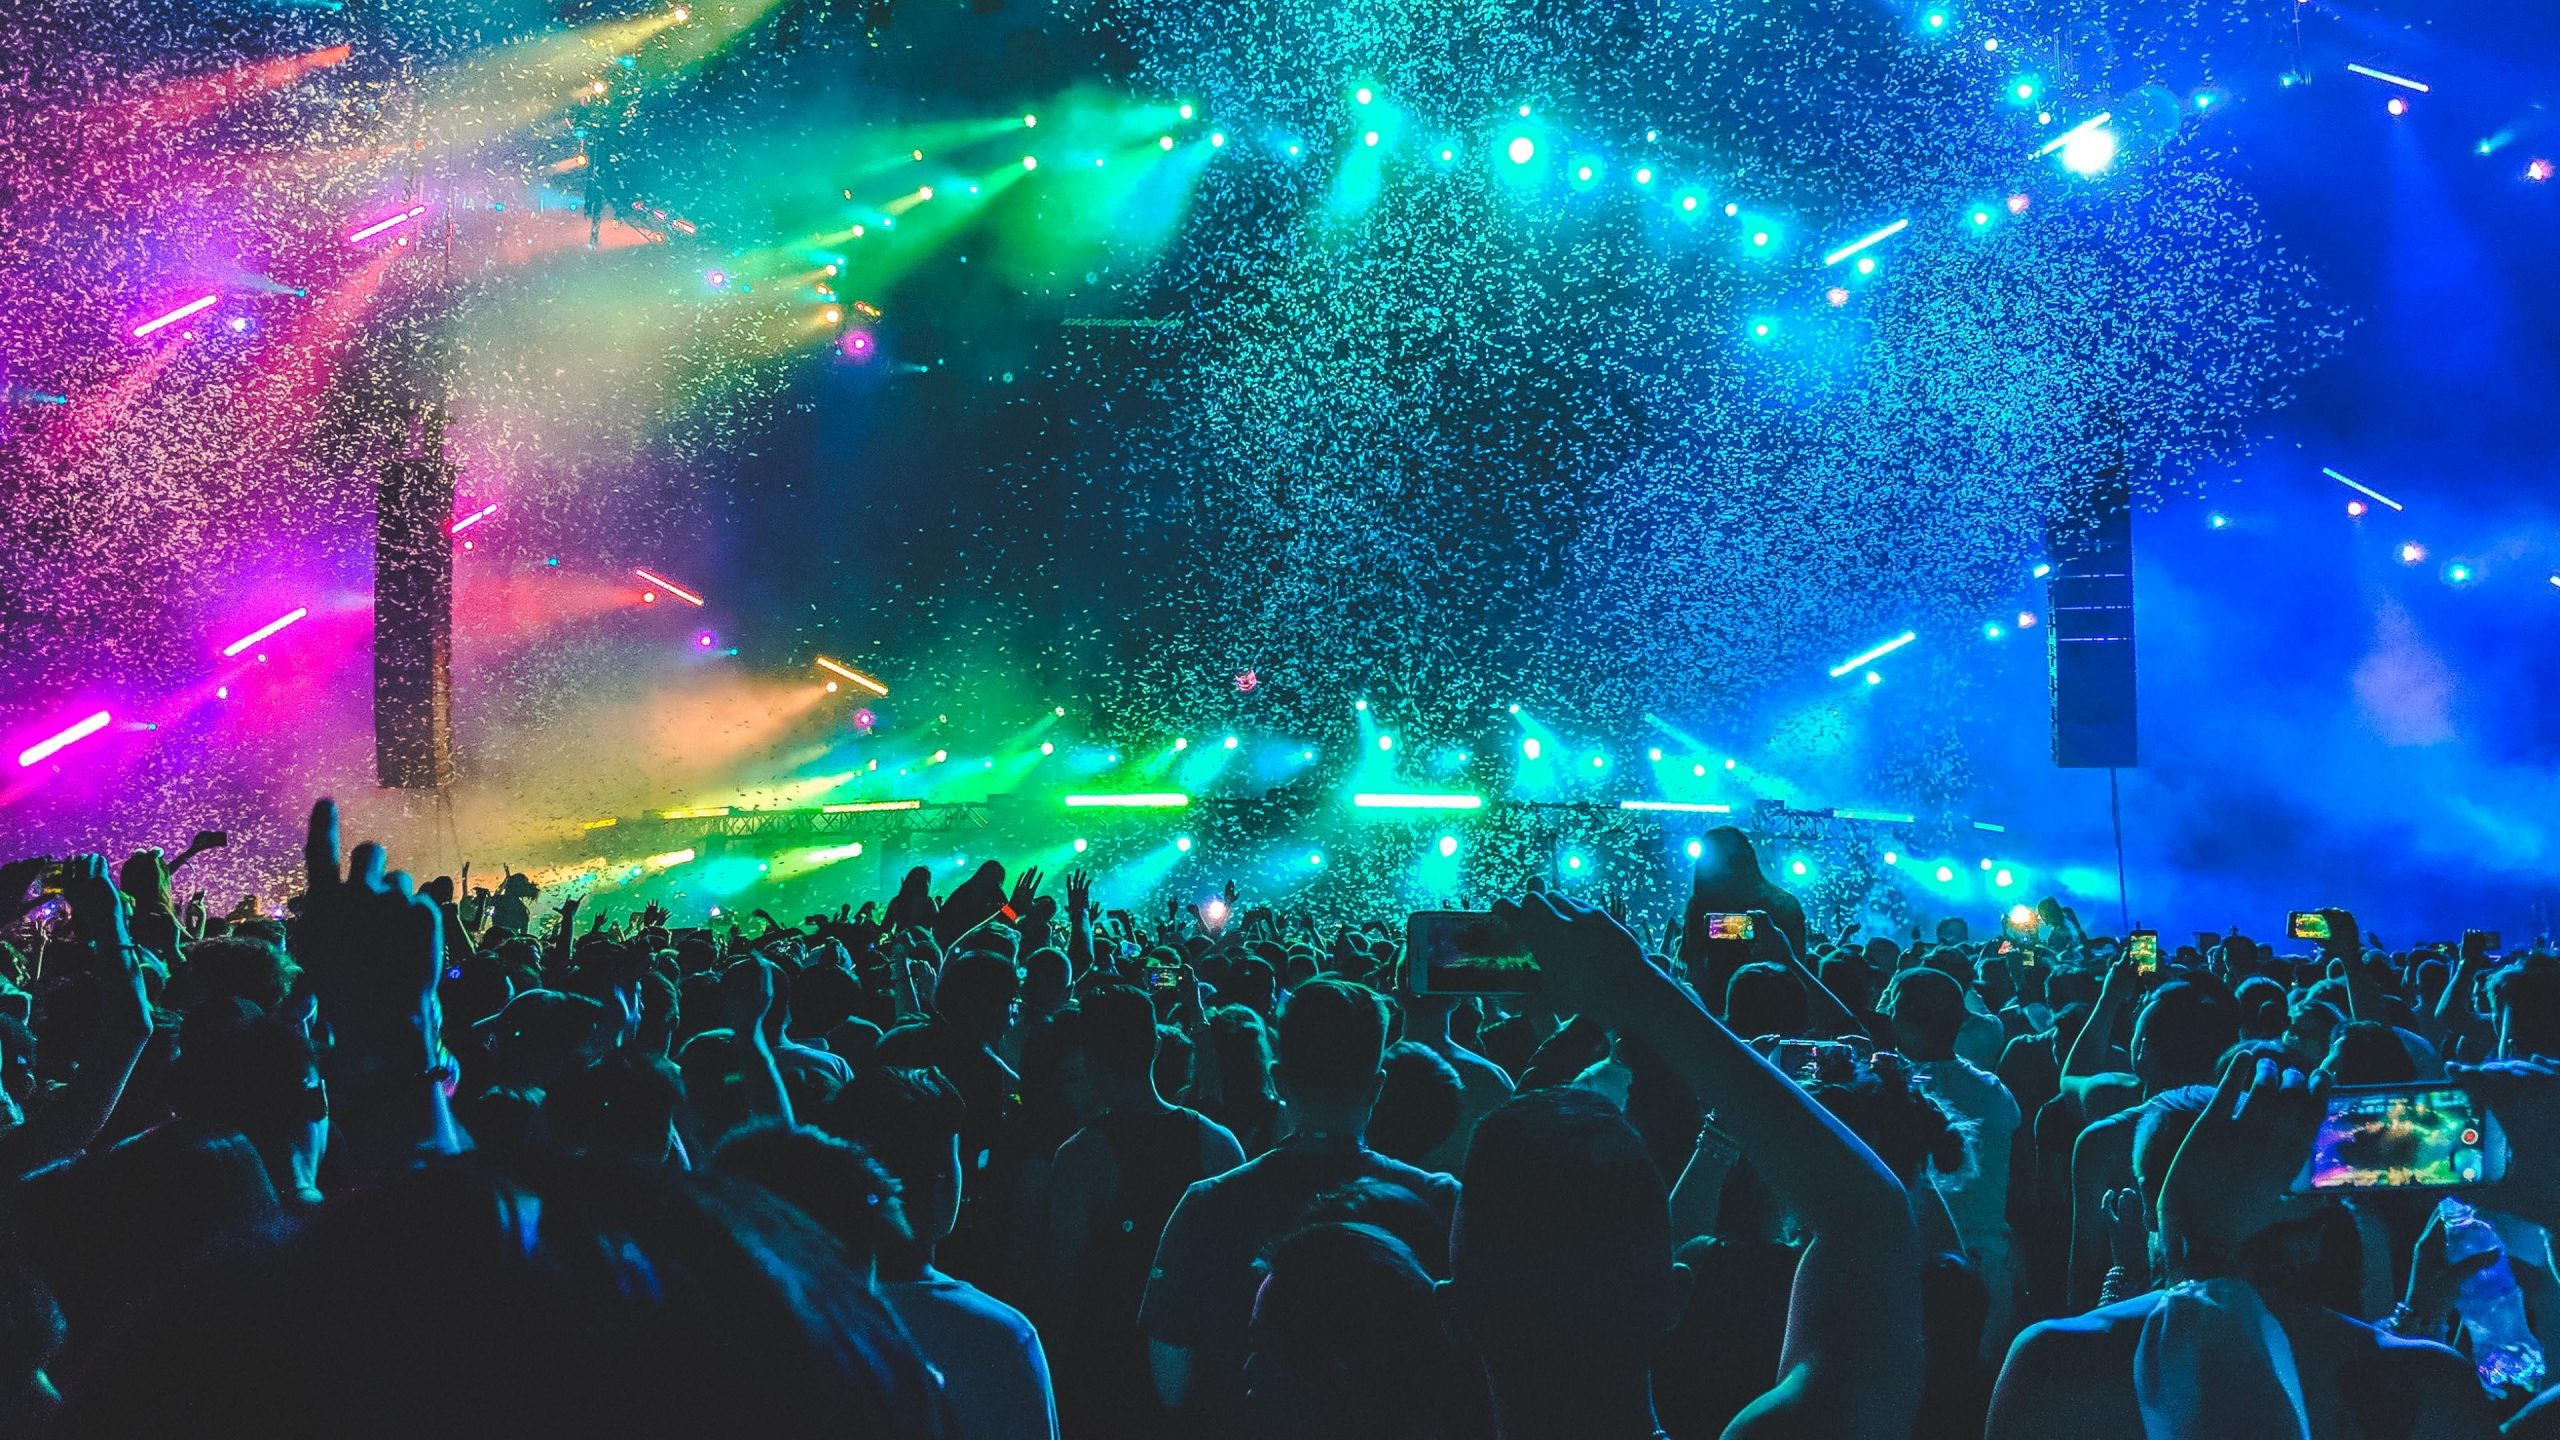 Life wallpaper, concert, music, party, lights, people, colors, neon lights